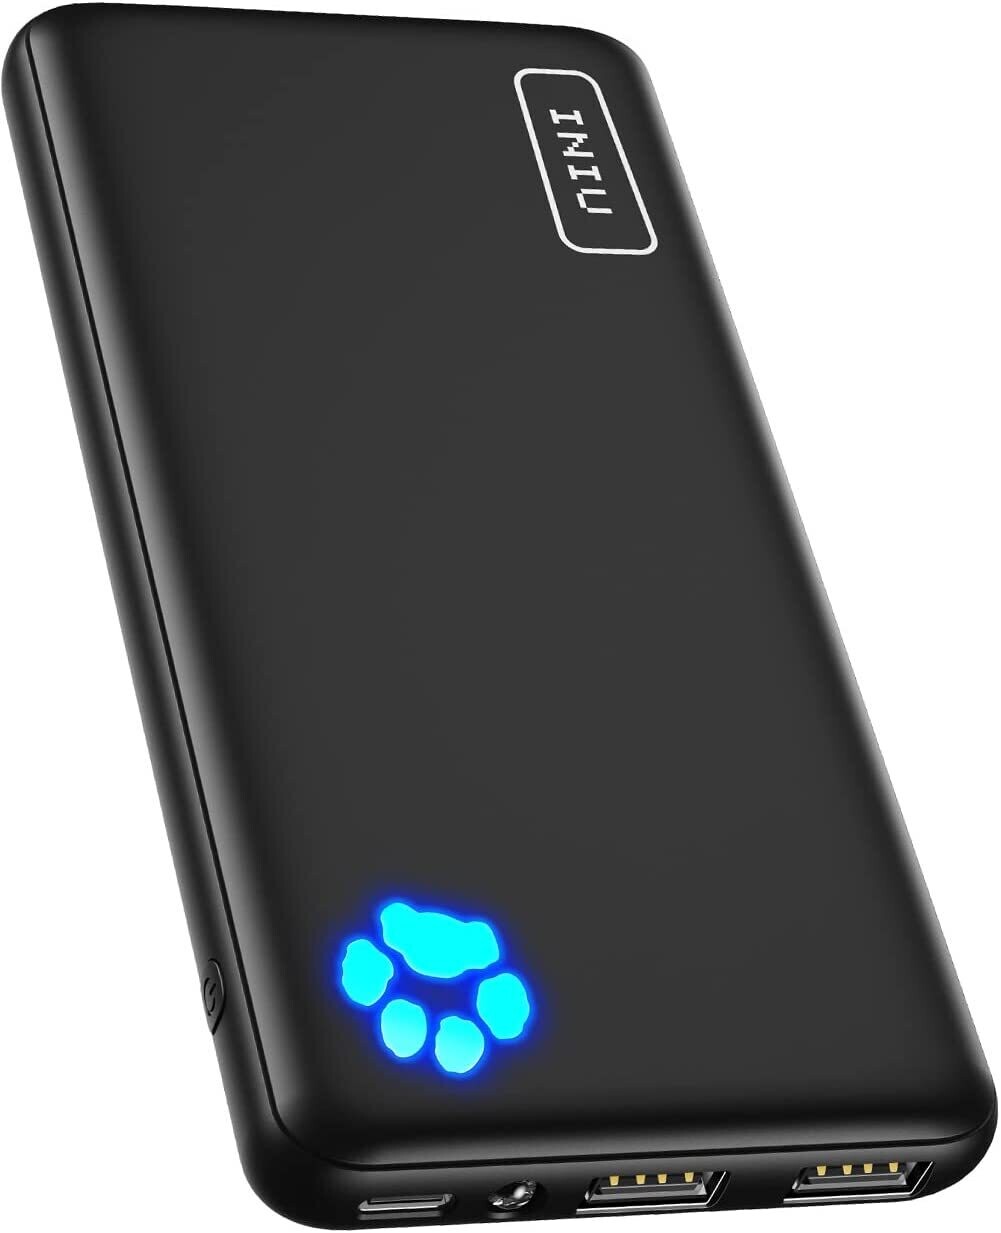 INIU Portable Charger, USB C Slimmest Triple 3A High-Speed 10000mAh Phone Power Bank - New